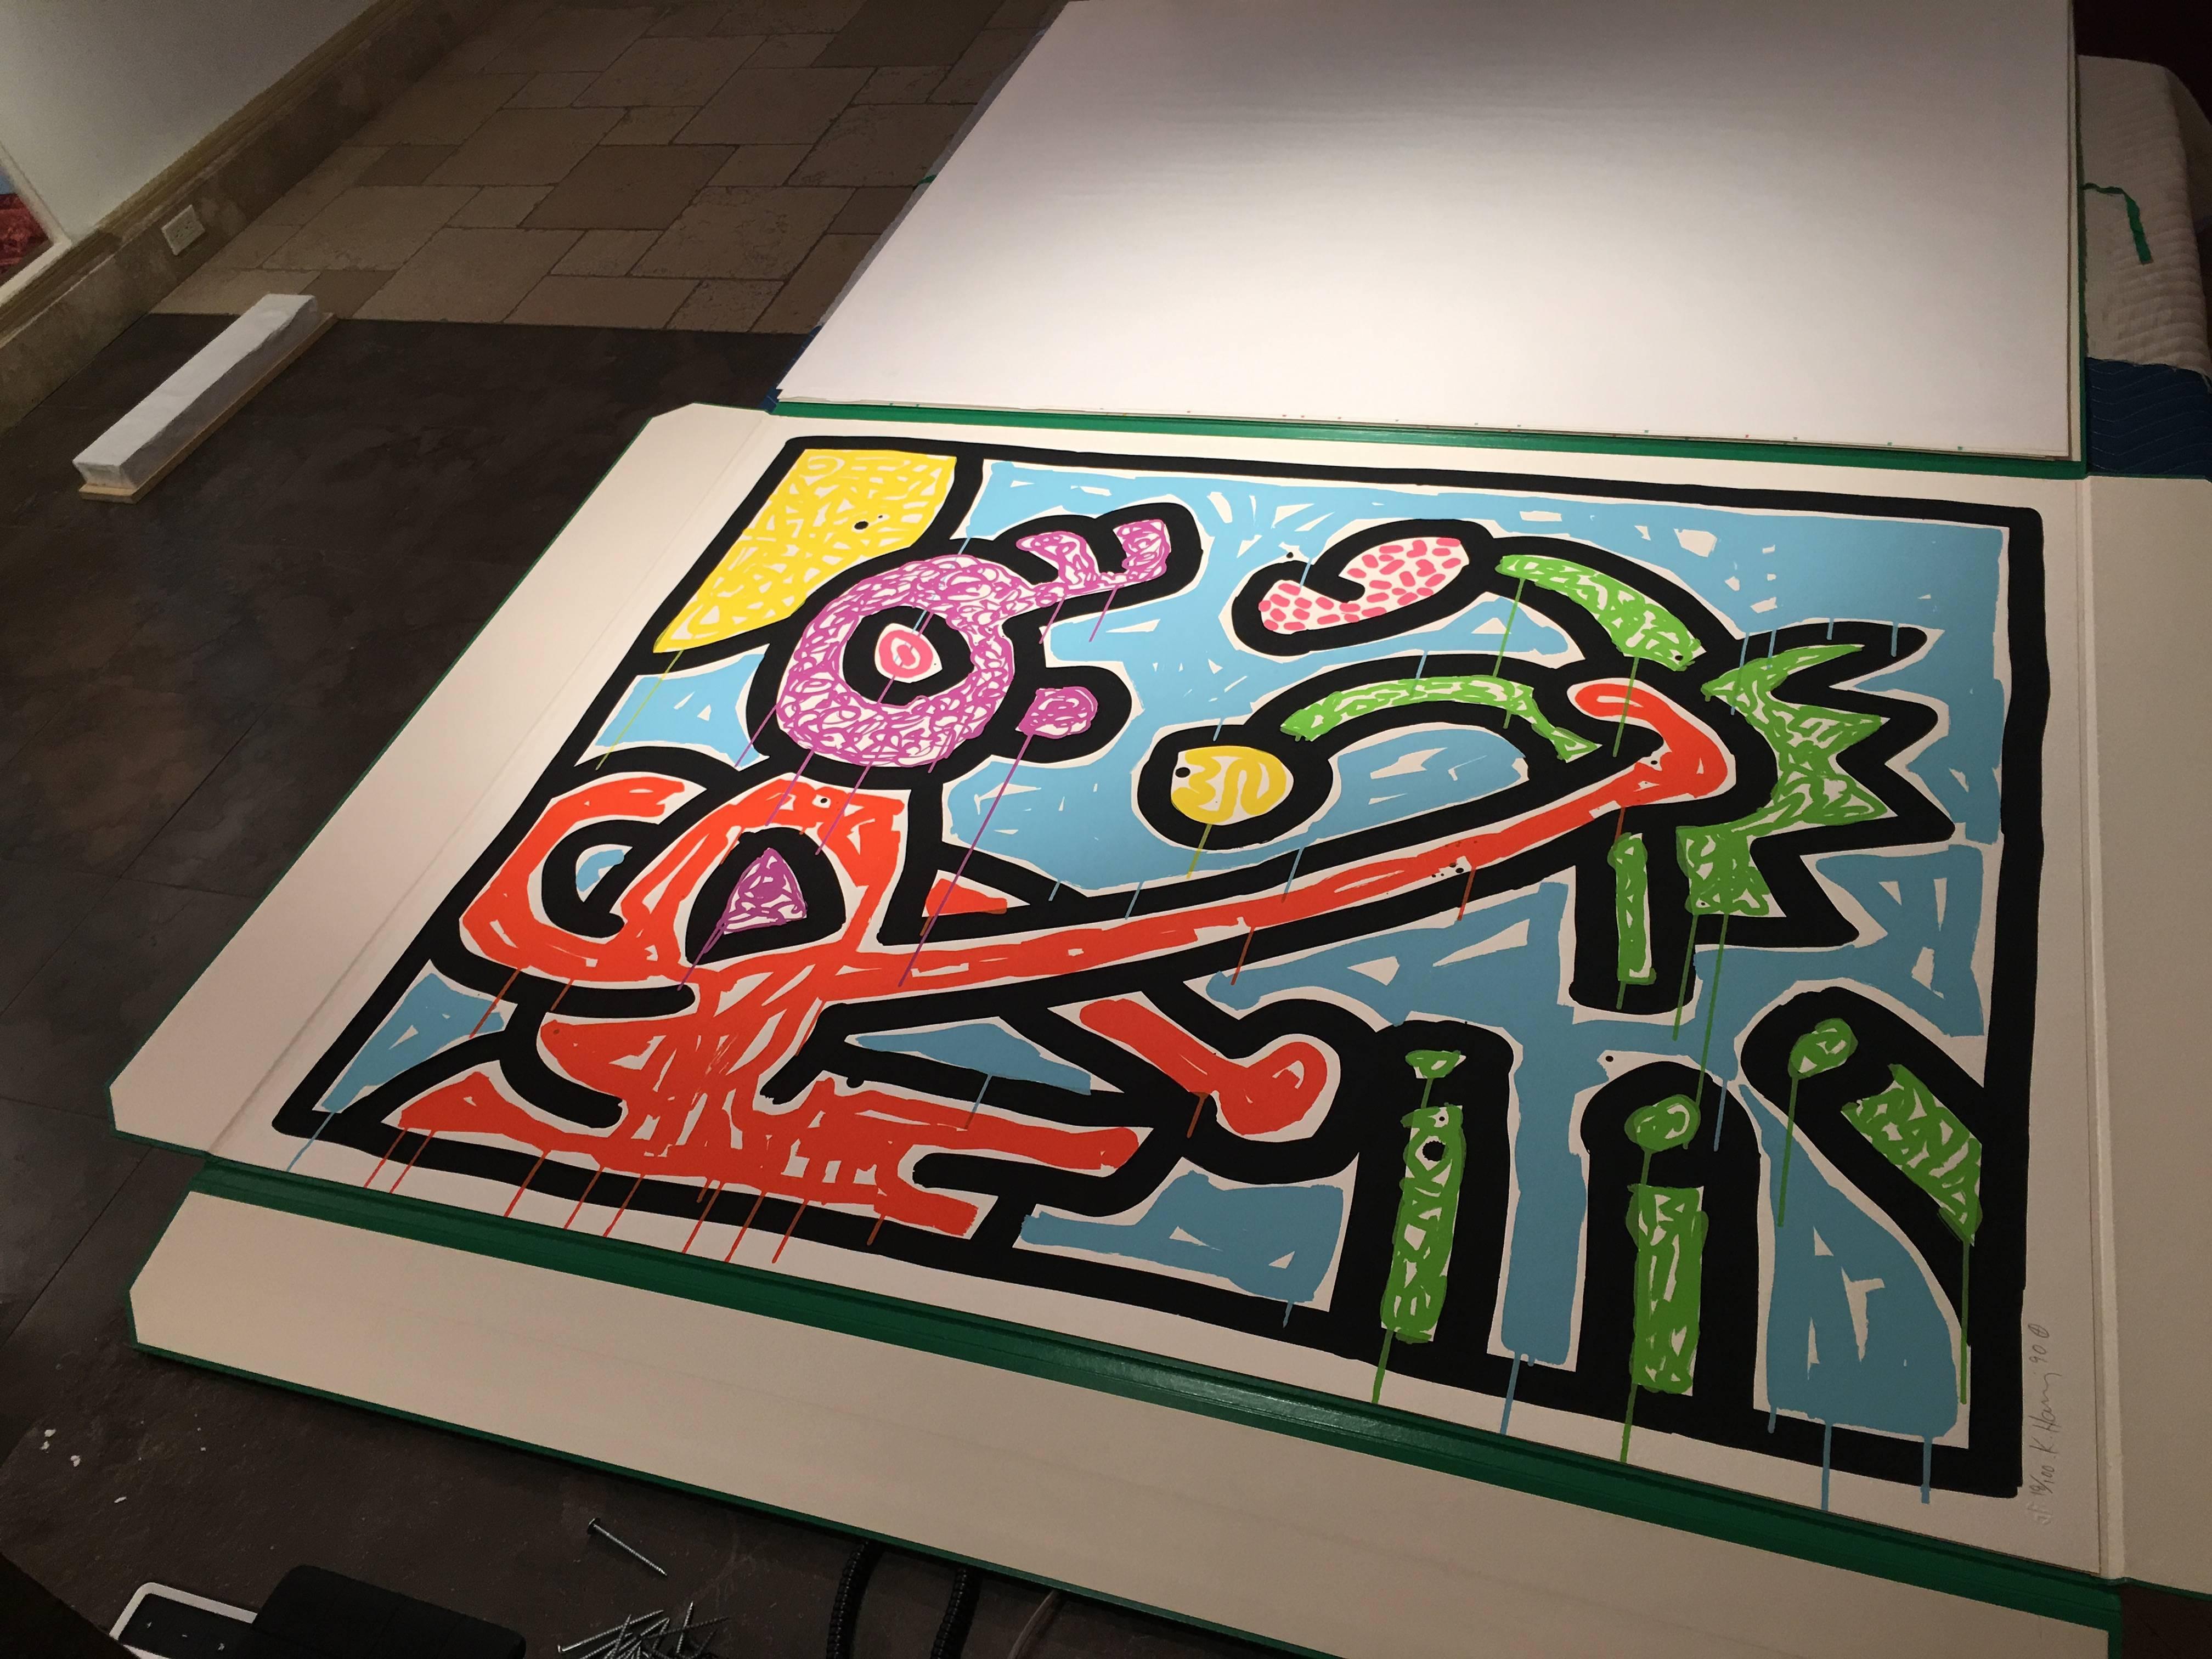 Flowers (1) - Print by Keith Haring